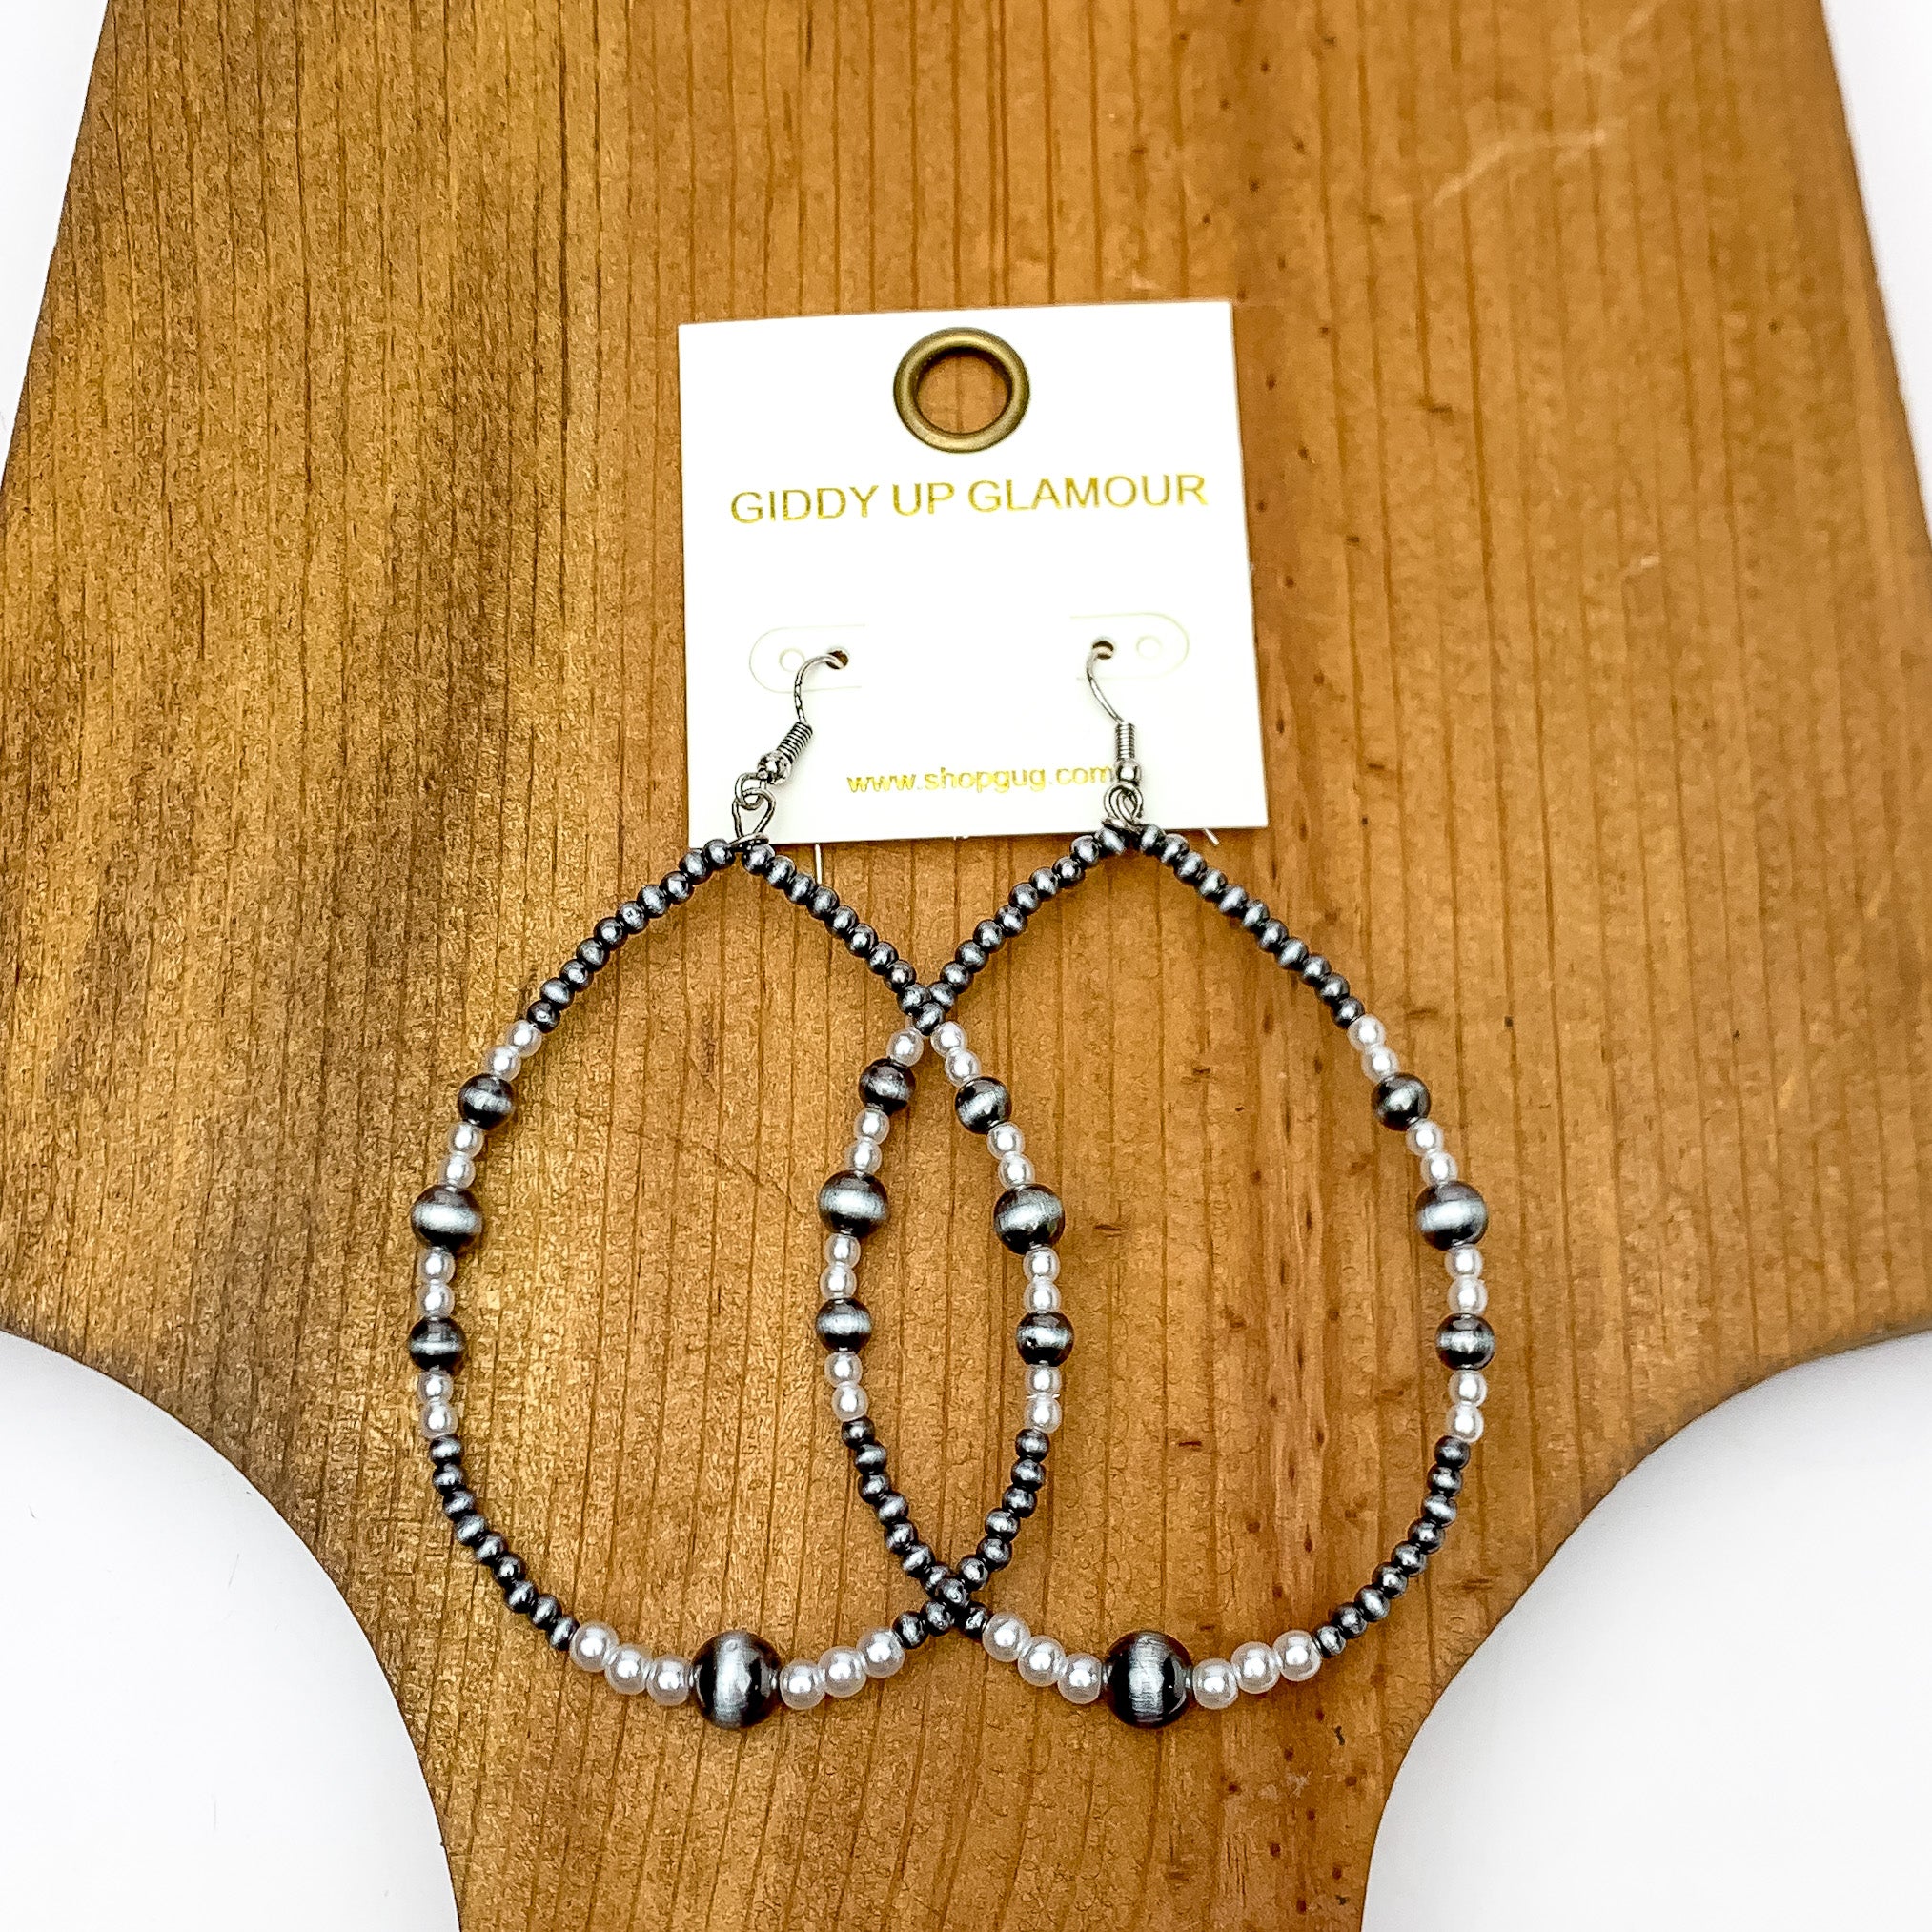 Open Teardrop Earrings With Beads in Silver Tone and White. Pictured on a white background with the earrings on a wood piece.